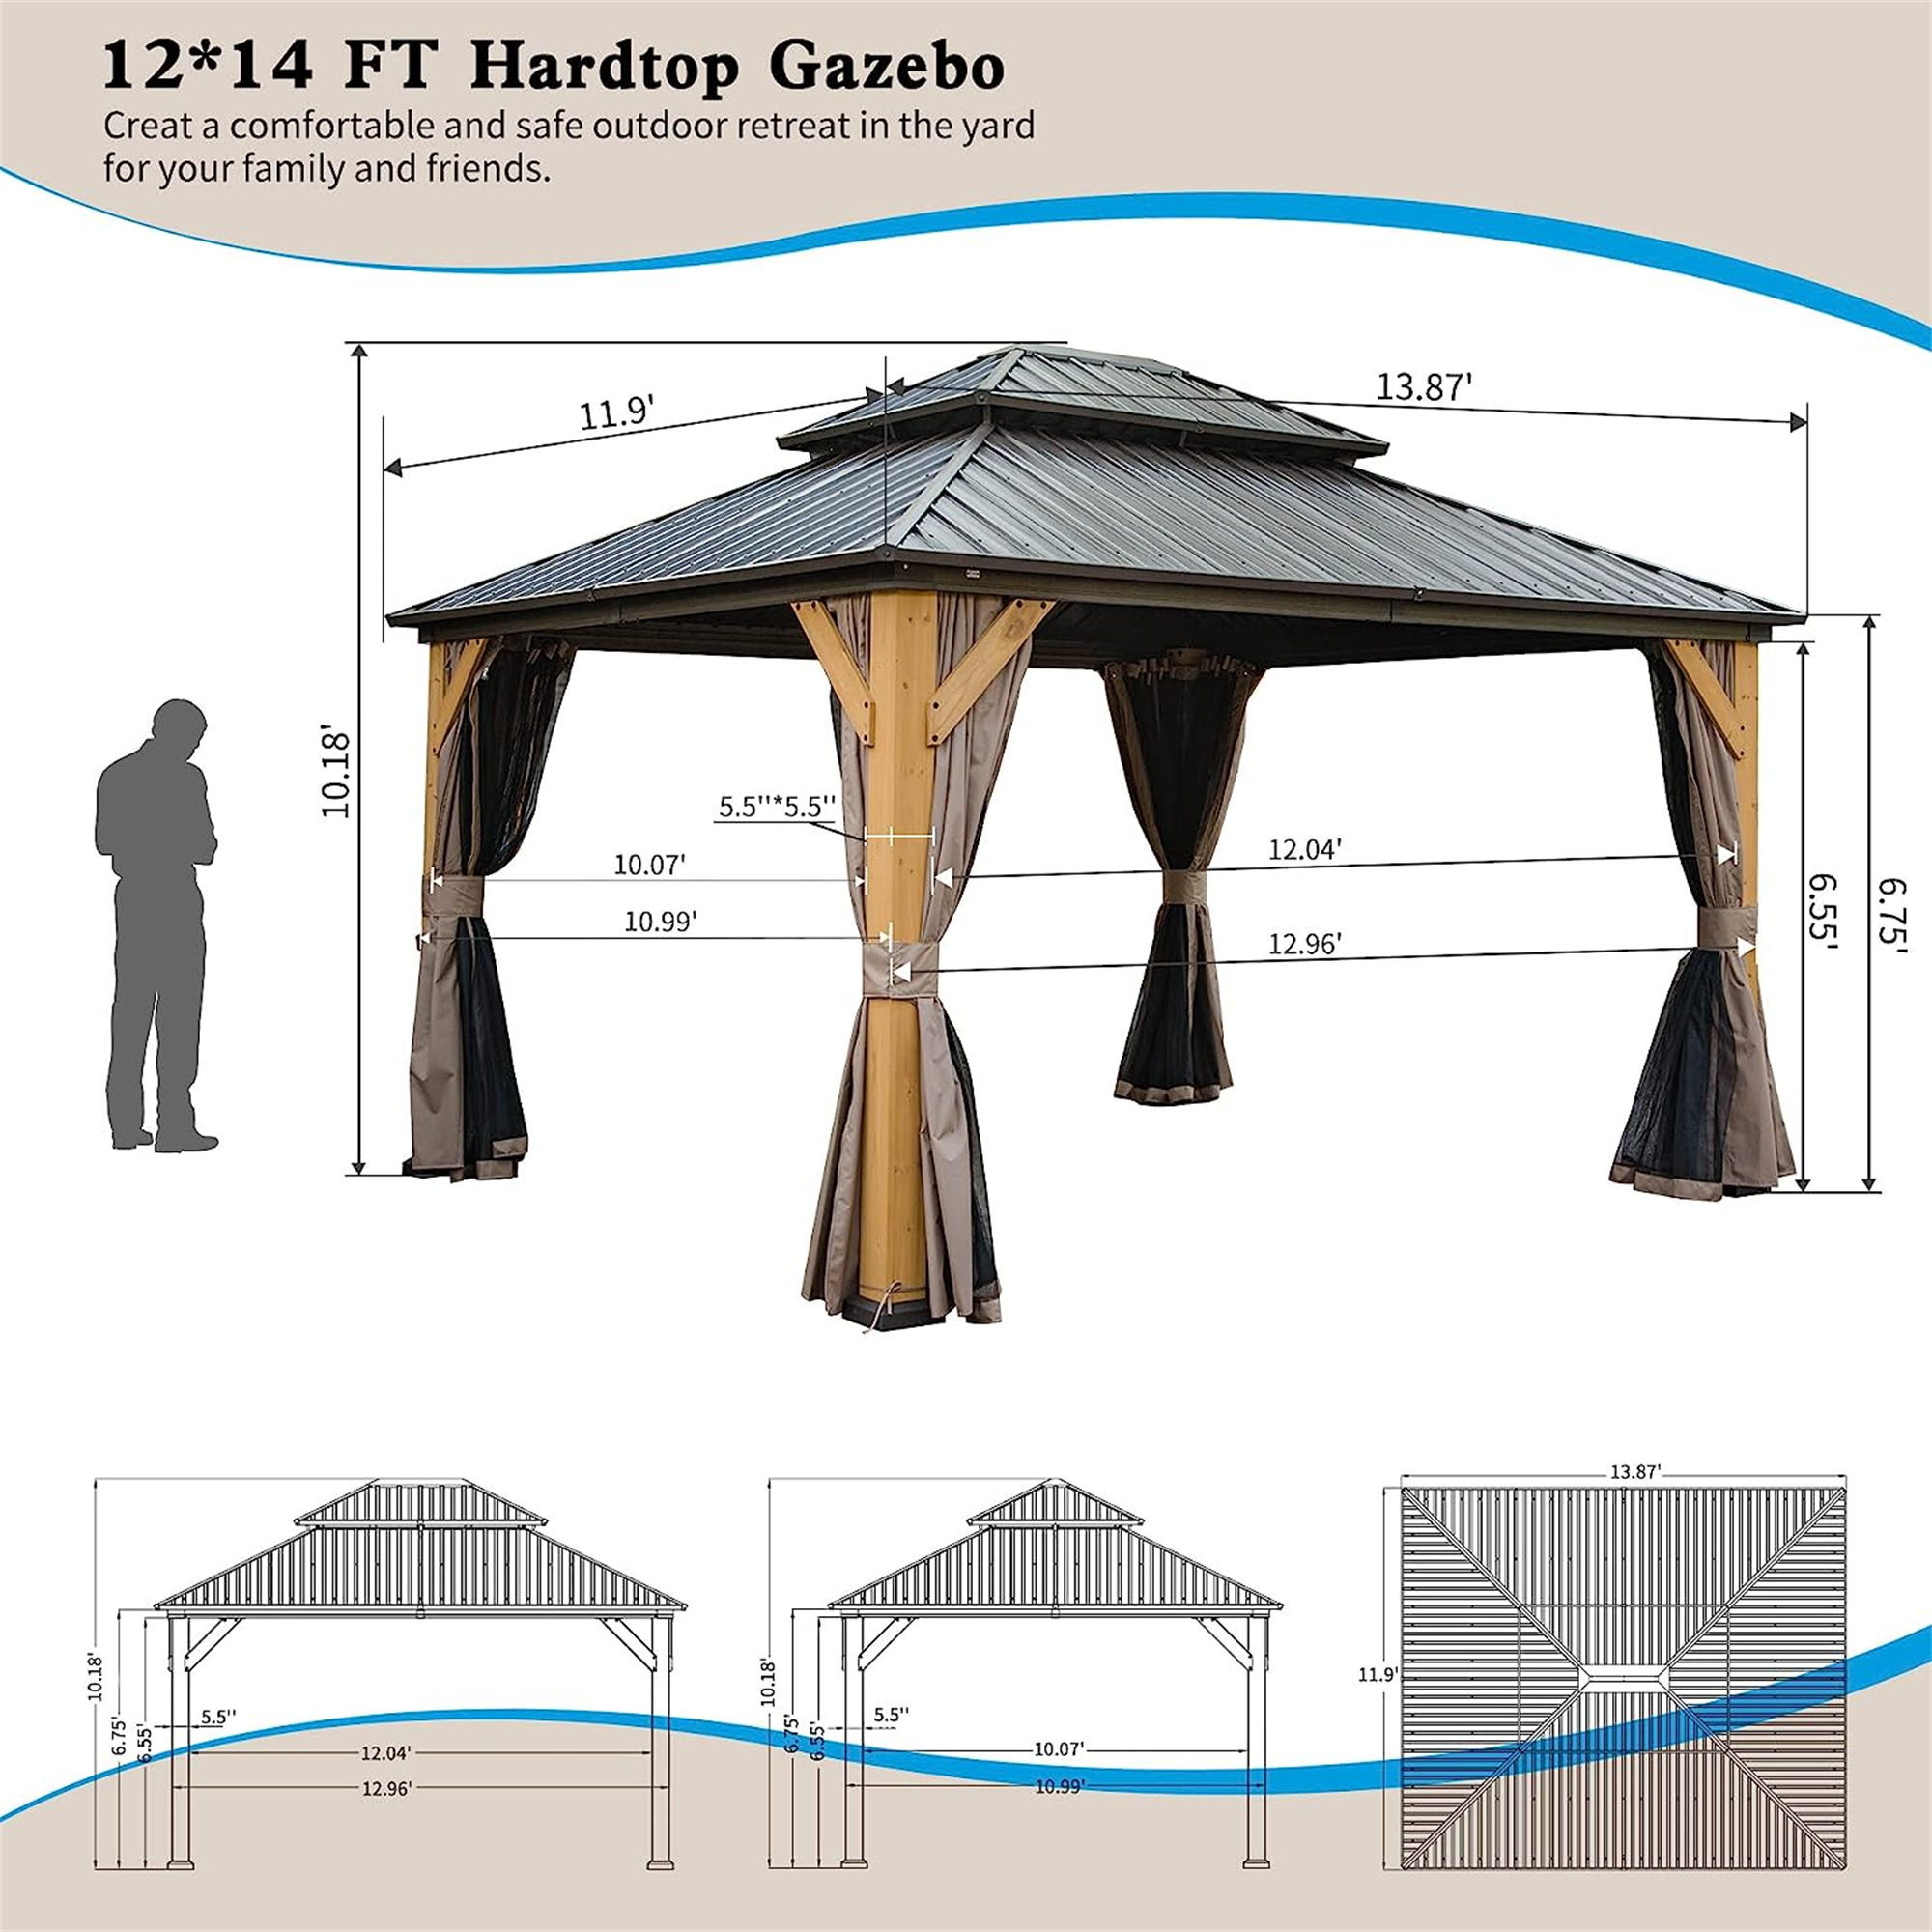 Mondawe Outdoor 12x14 ft Wood Grain Aluminum Frame Gazebo with Curtains and Netting Permanent Galvanized Steel Hardtop Roof Pavilion Canopy for Patio, Backyard, Deck